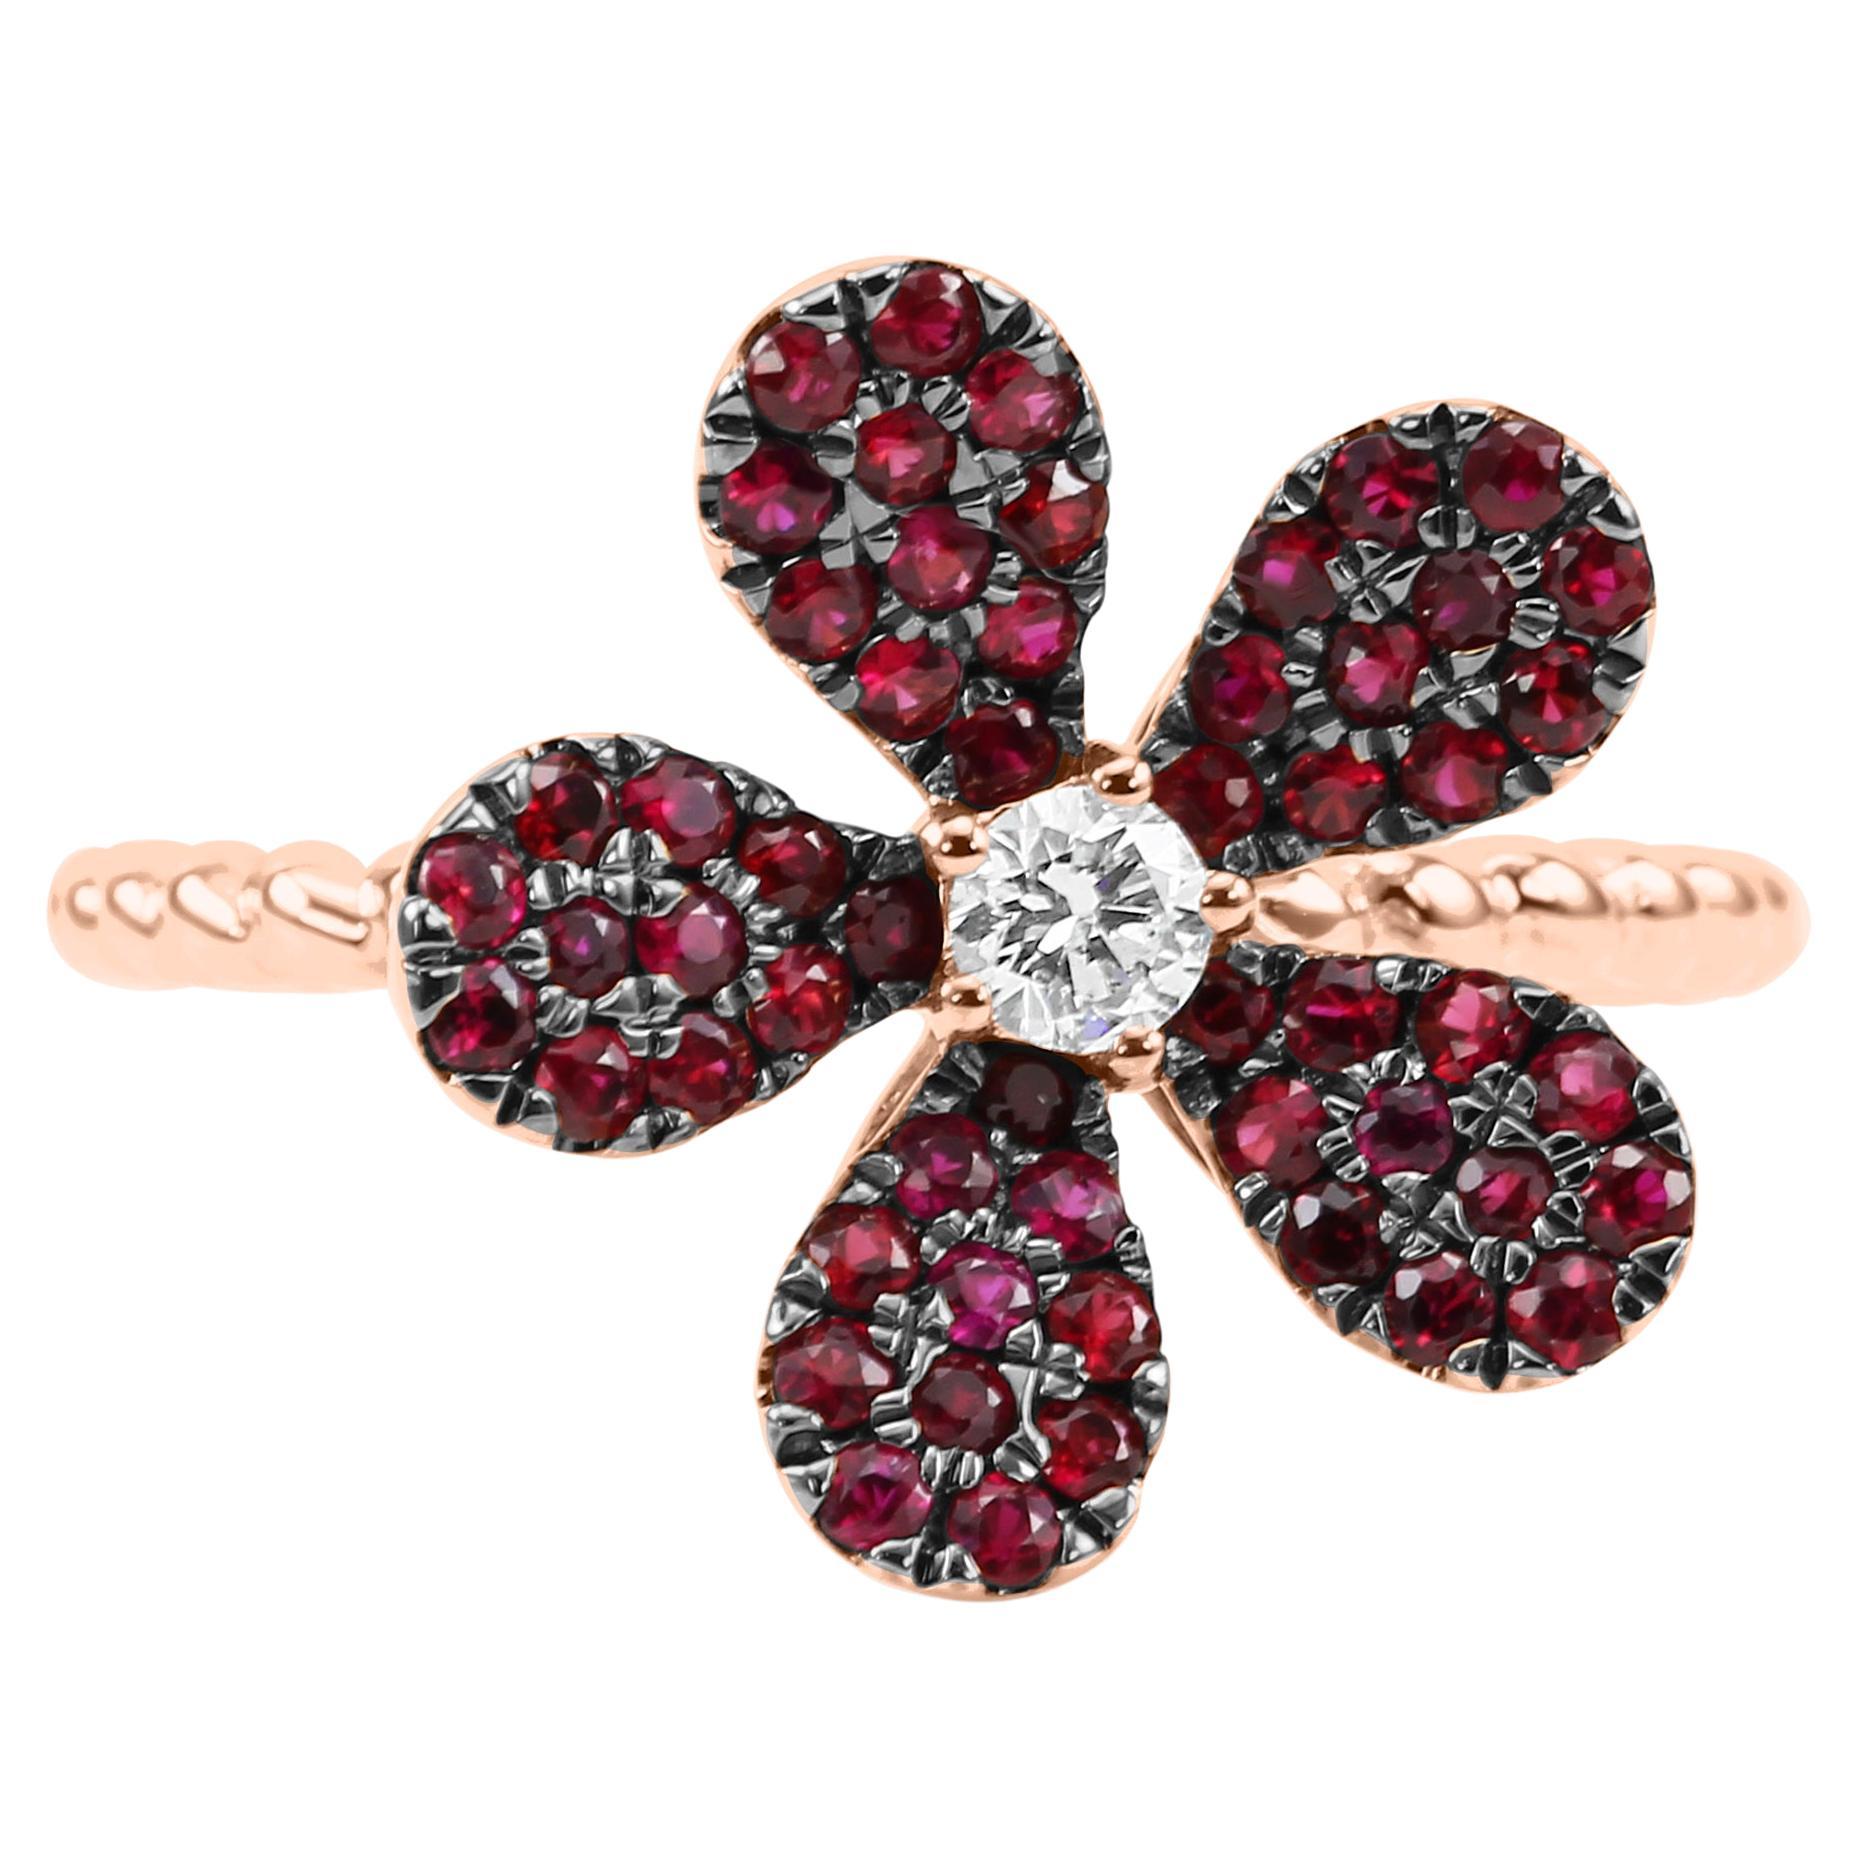  Ruby Round White Diamond 14K Rose Gold Flower Shape Cocktail Fashion Ring  For Sale